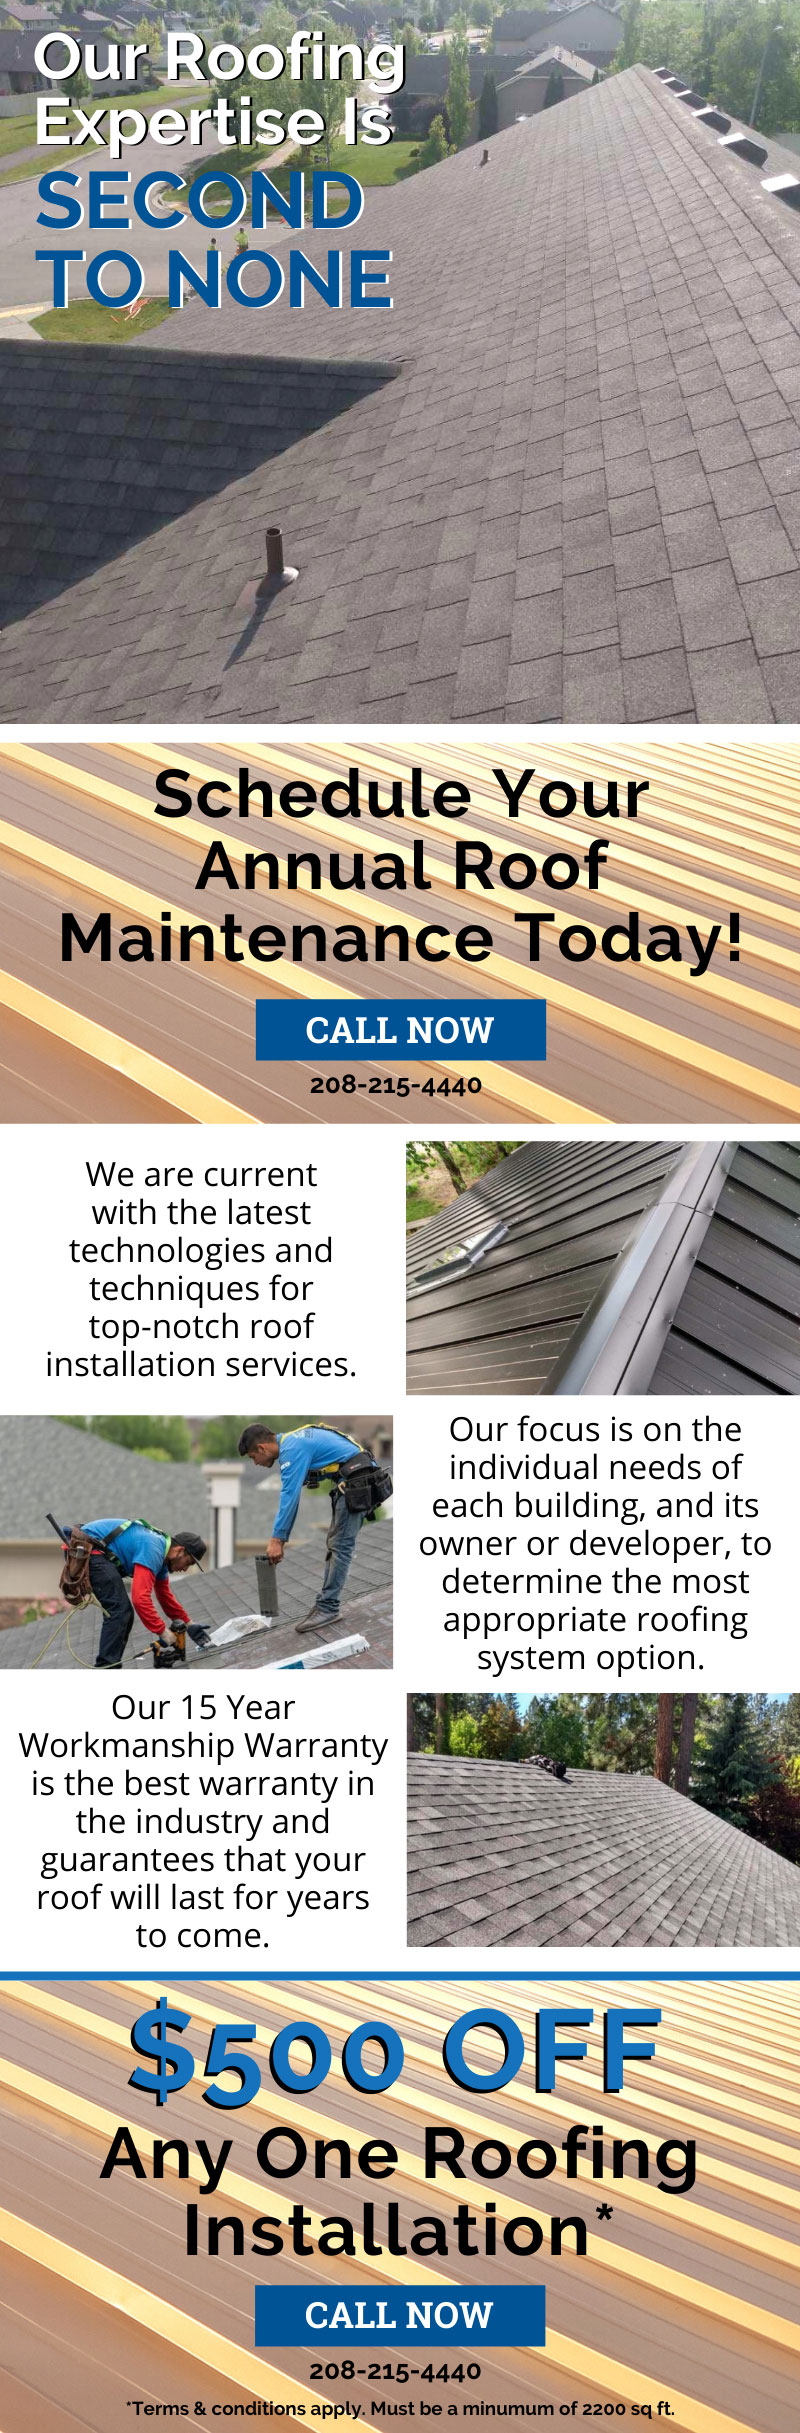 Our Roofing Expertise Is Second To None 1